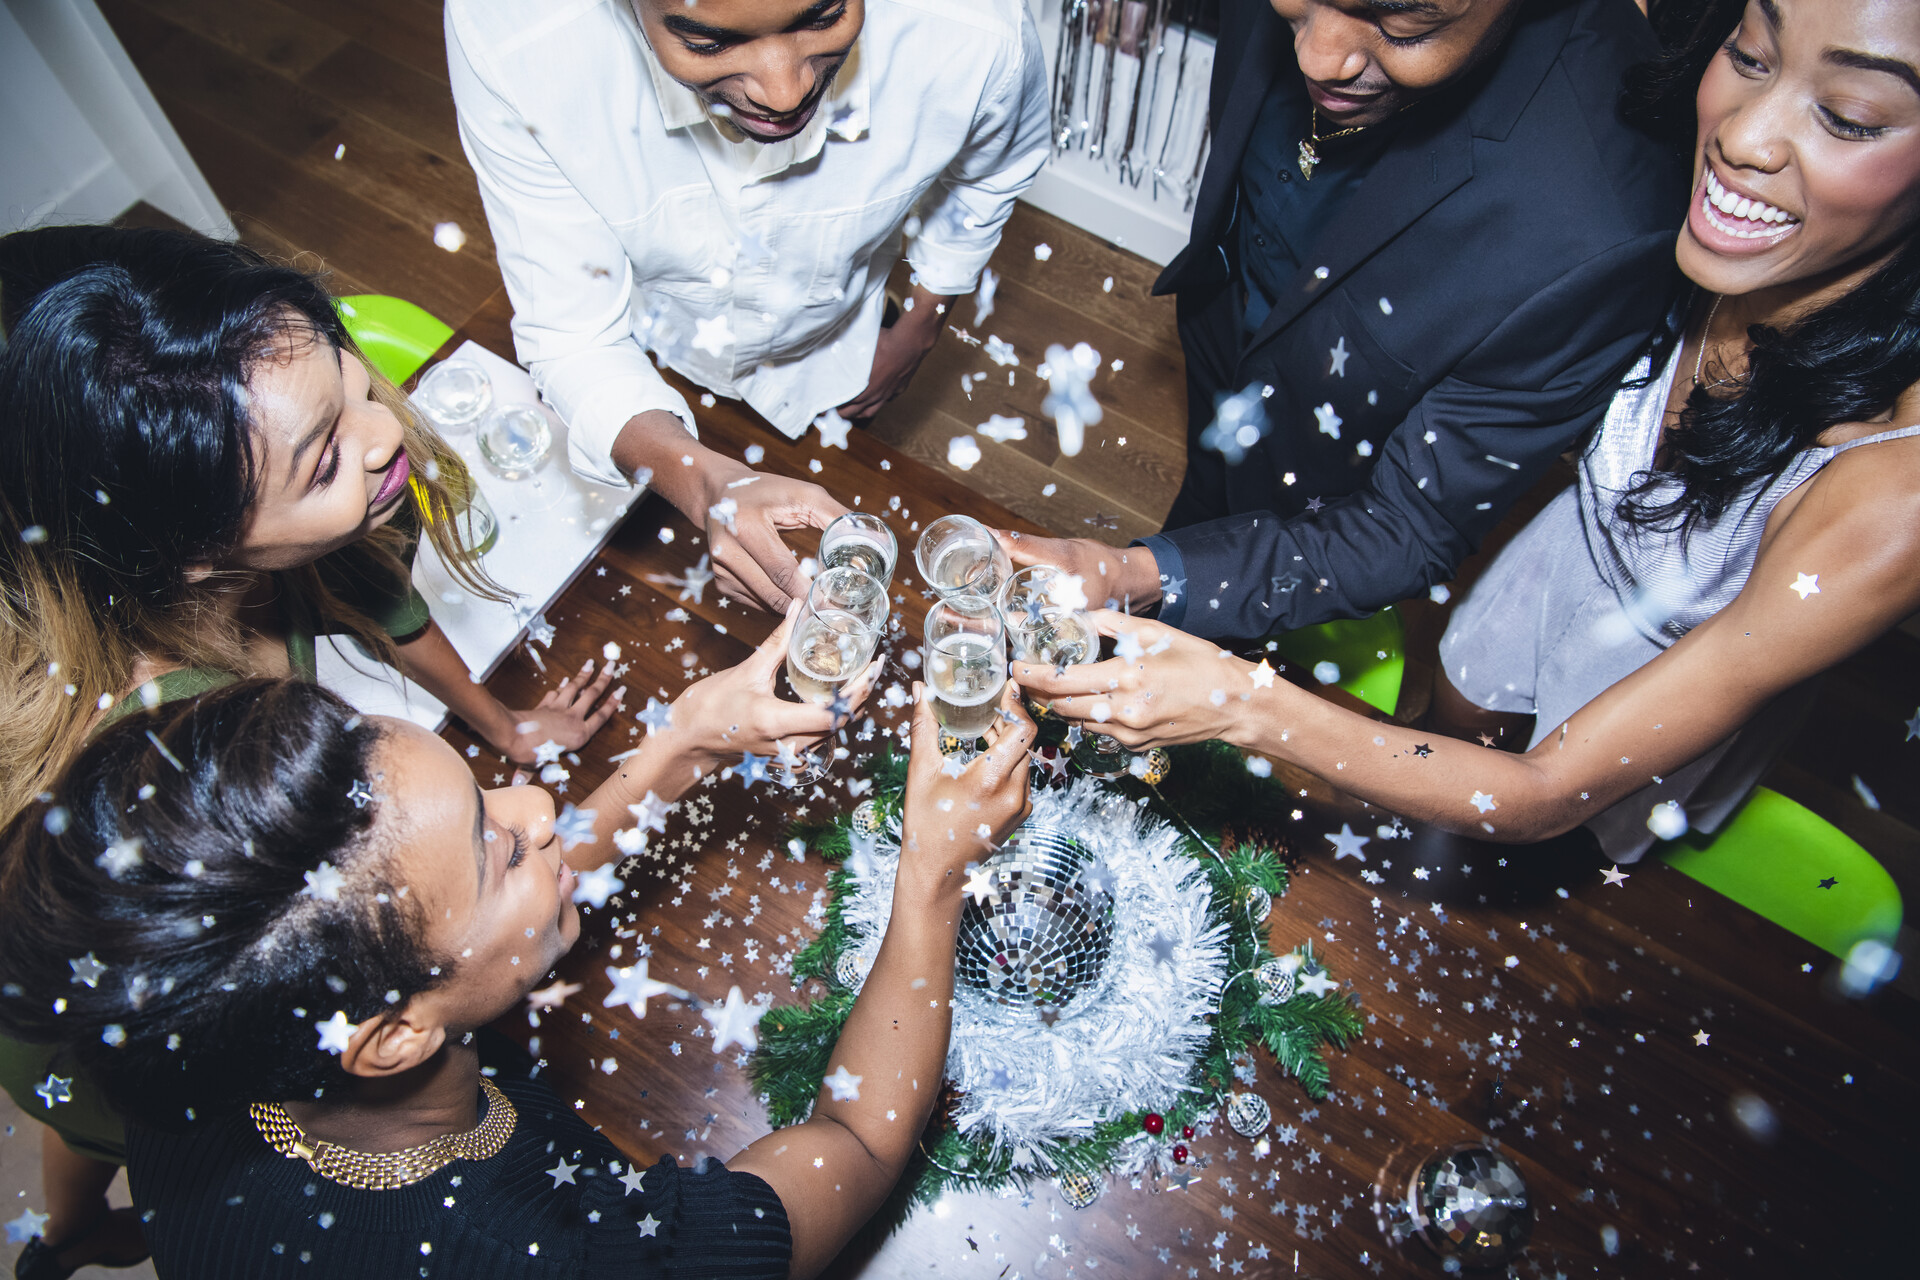 A photograph taken from above of a group of people "cheersing" their glasses at a New Year's Eve party